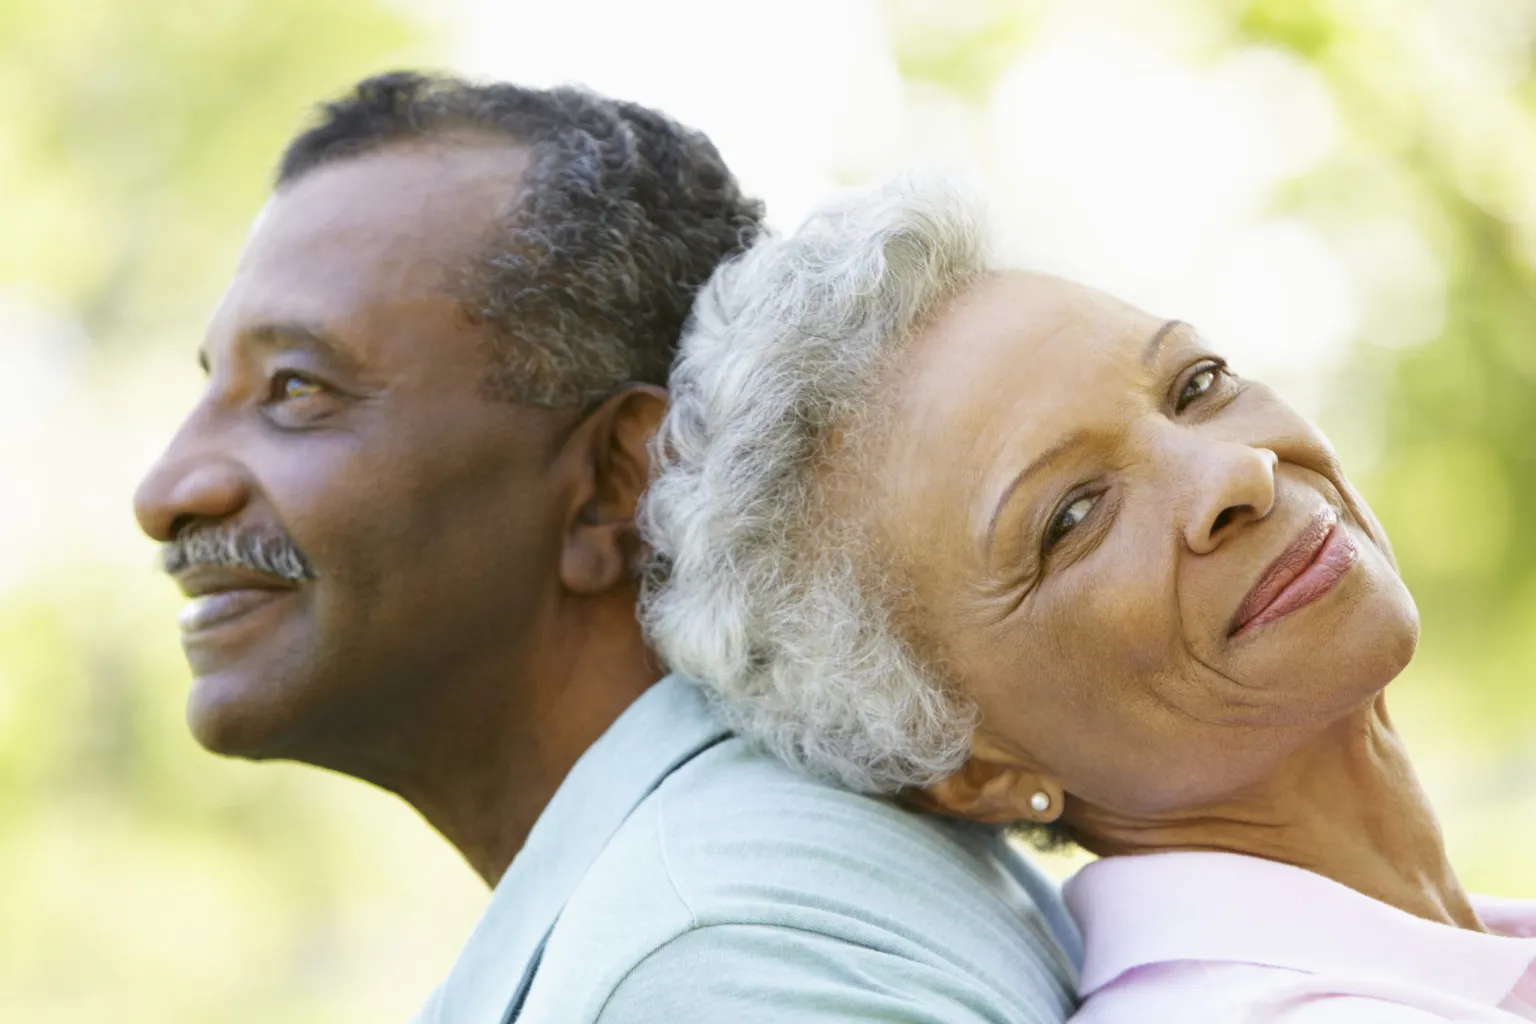 Creating a Mature Relationship With Your Partner